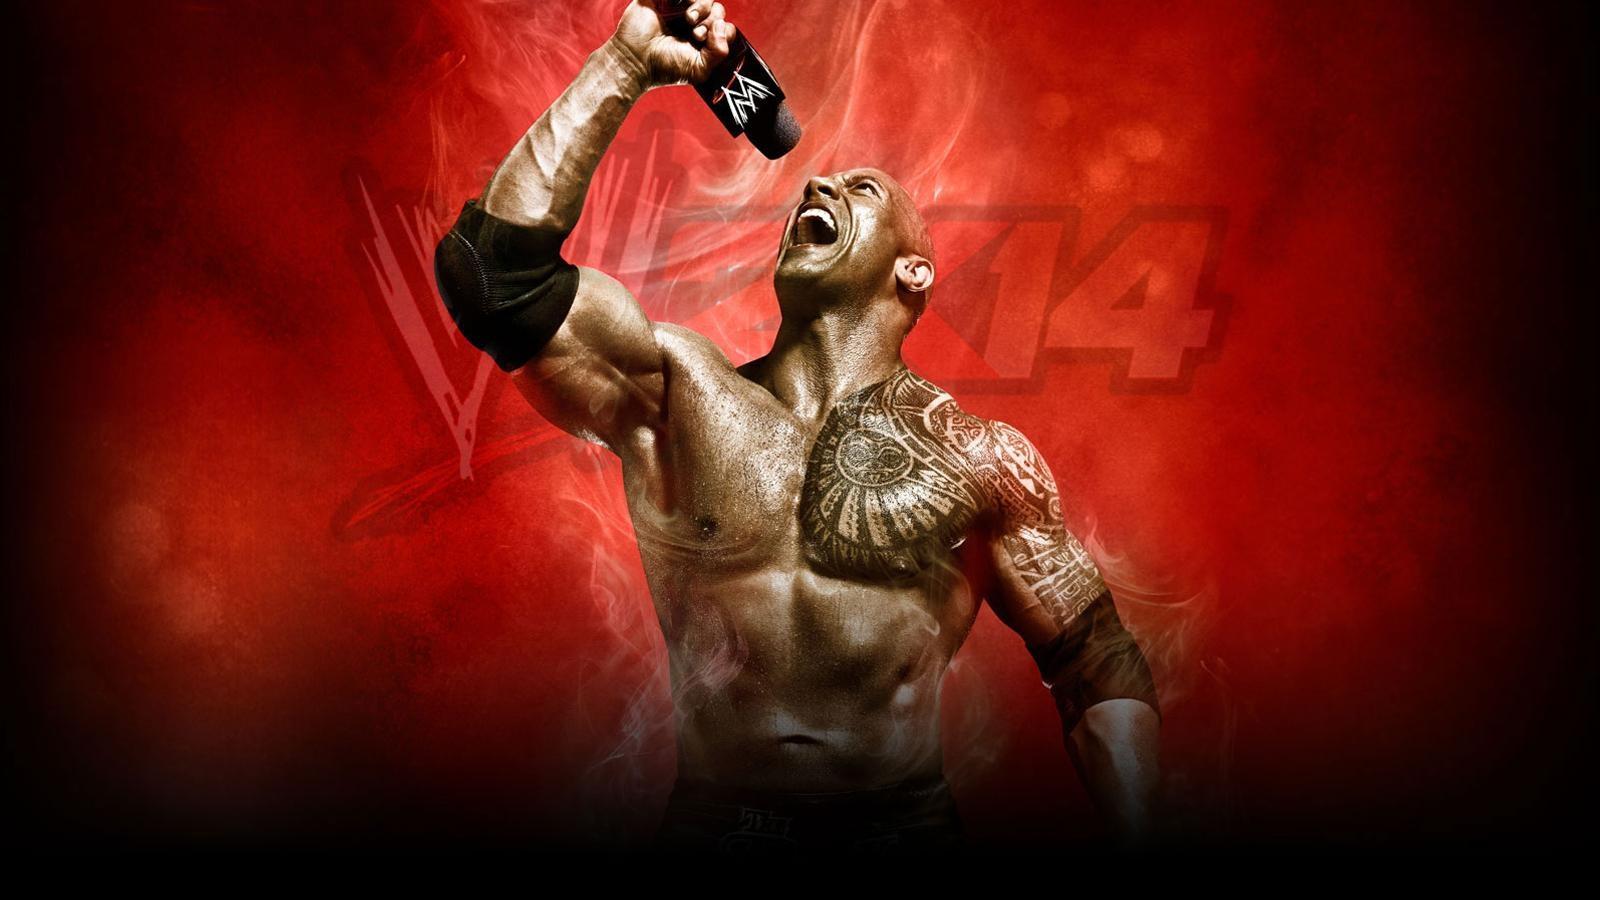 Wallpapers Of The Rock Wwe